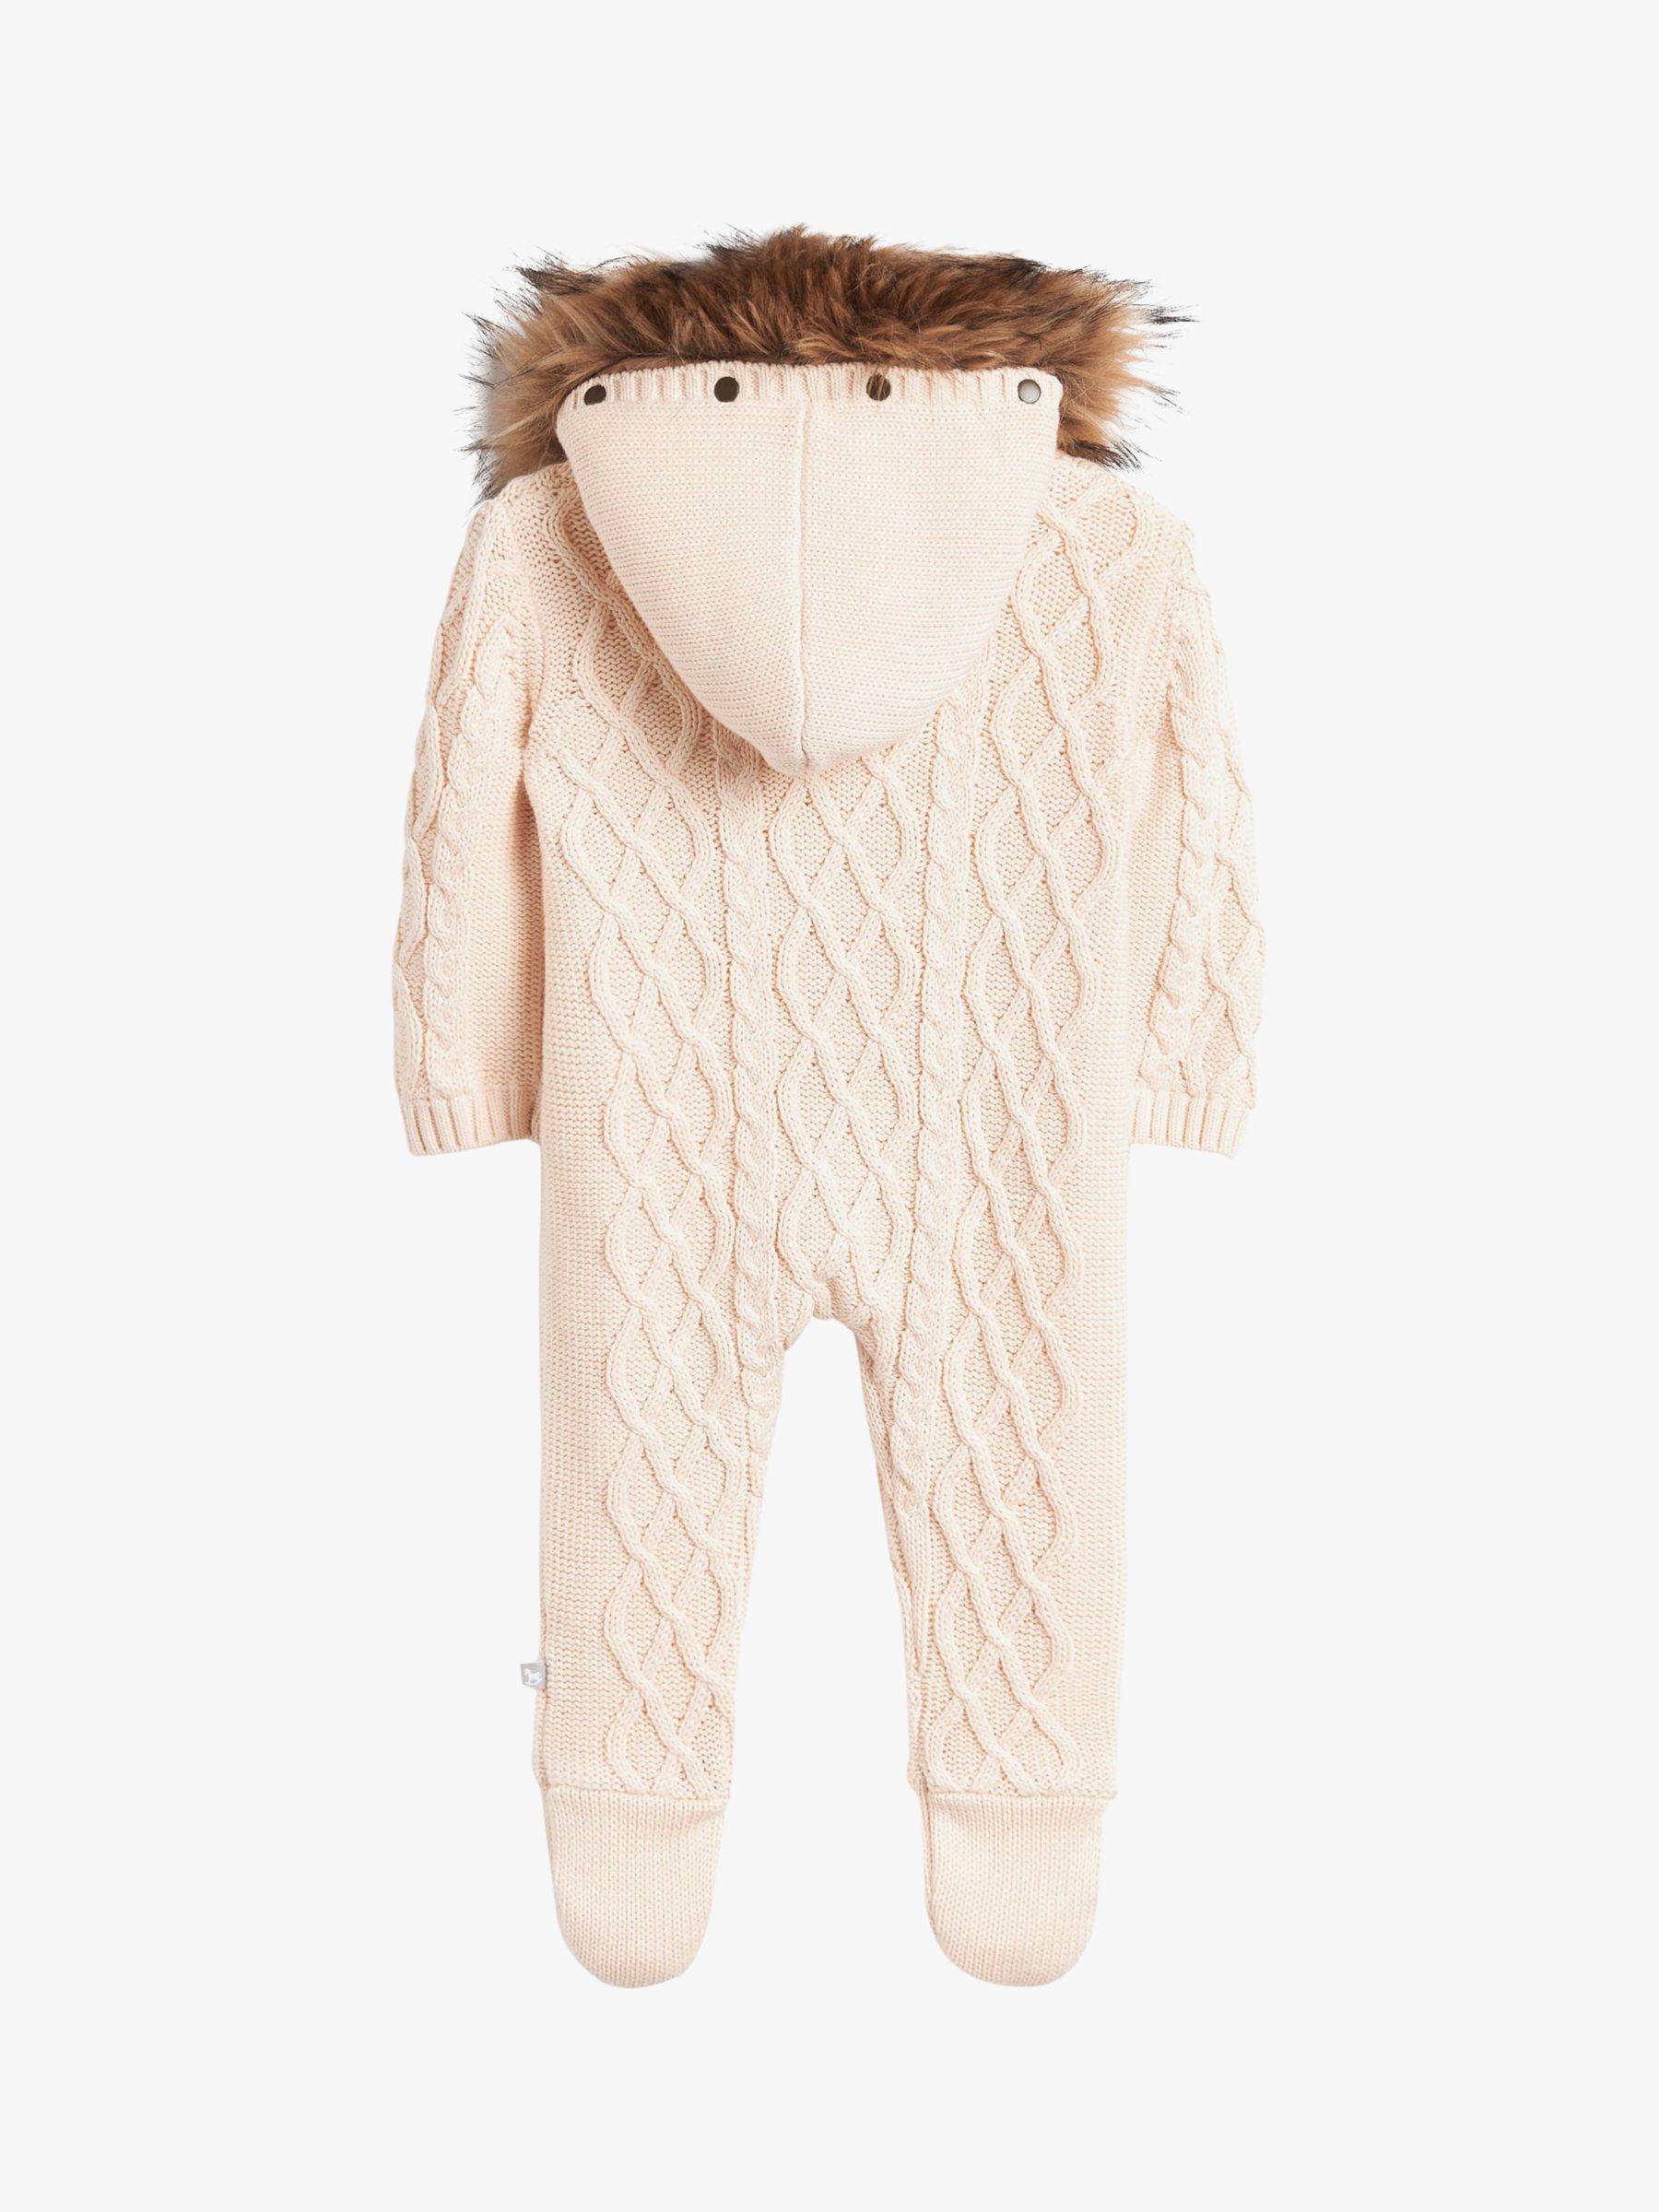 Buy The Little Tailor Kids' Knitted Faux Fur Hood Romper Online at johnlewis.com